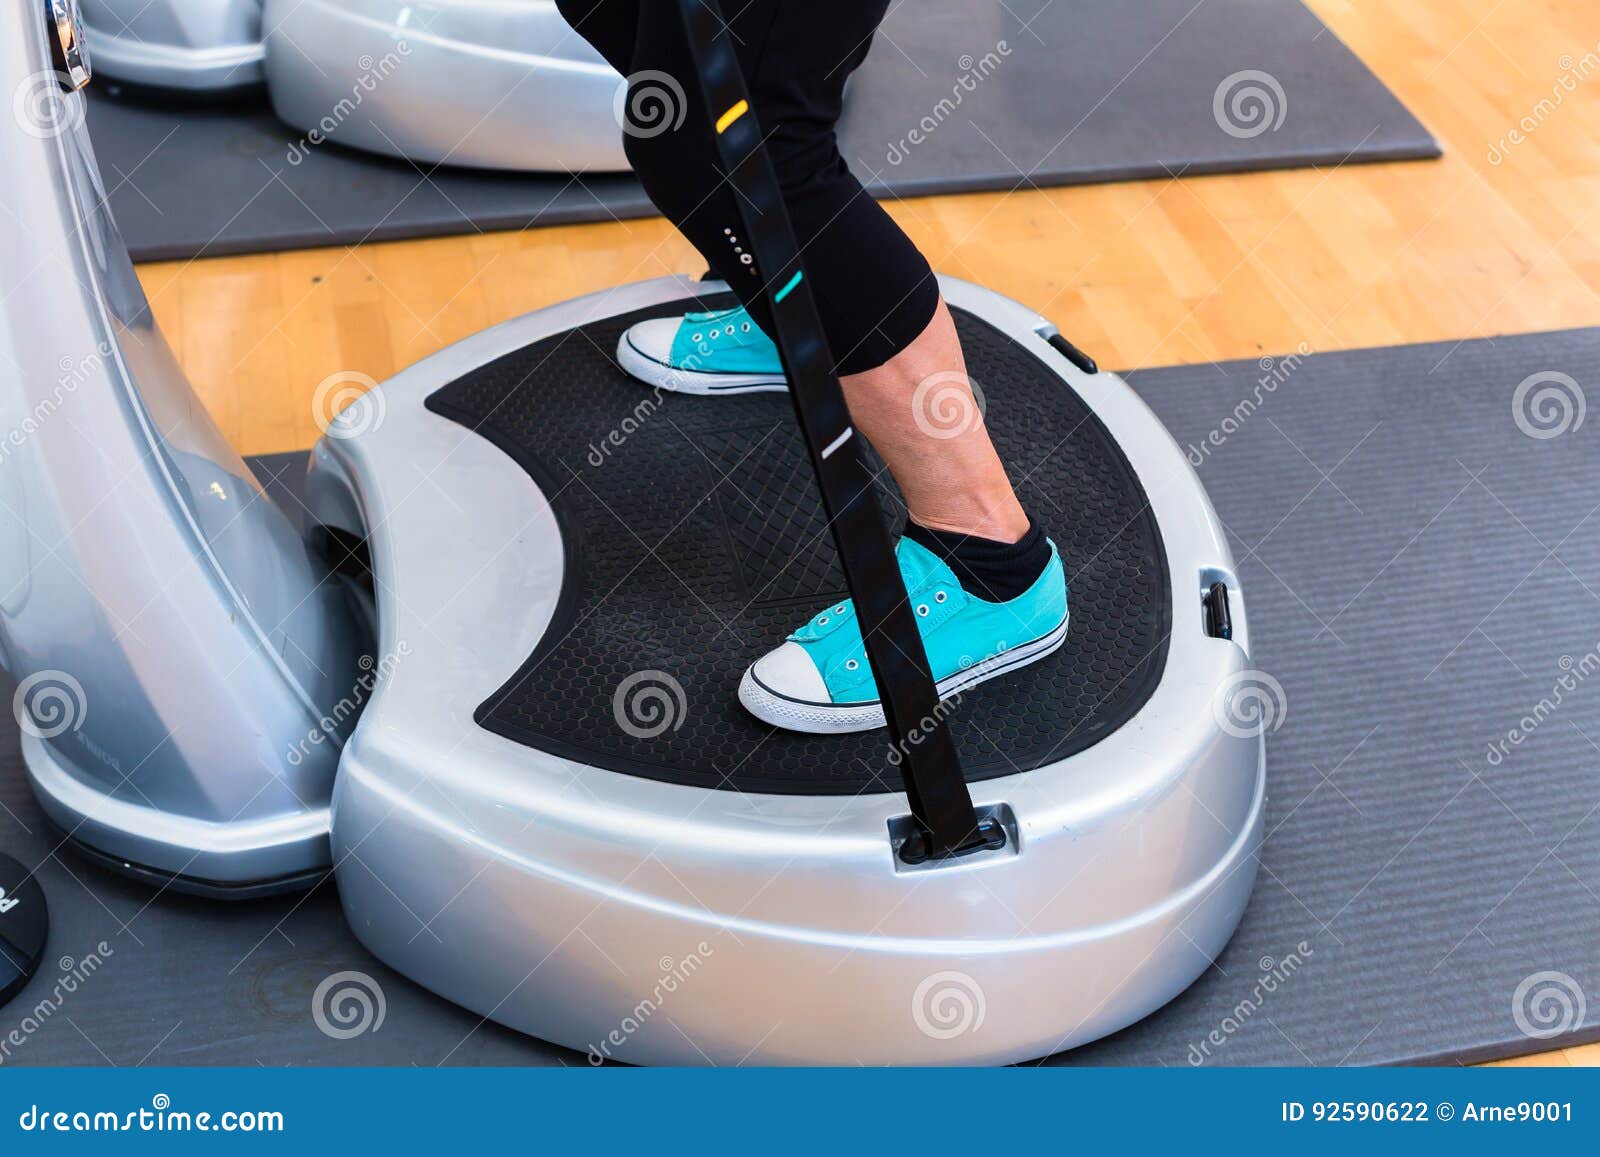 woman on vibrating plates in gym training